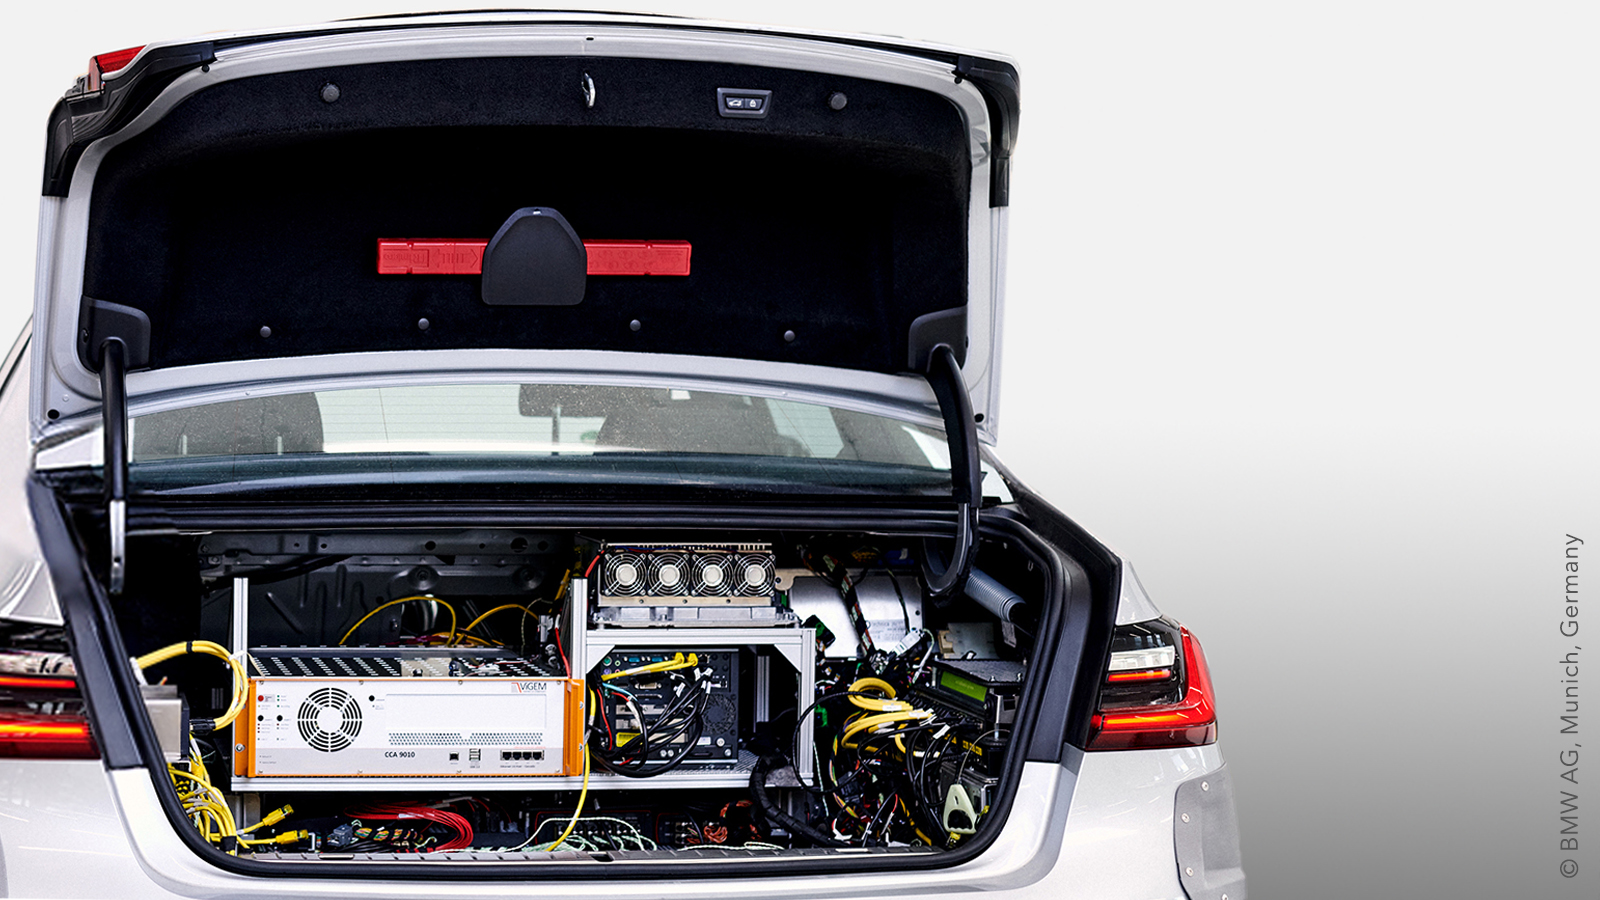 Data logger CCA 9010 from ViGEM in the trunk of a test vehicle